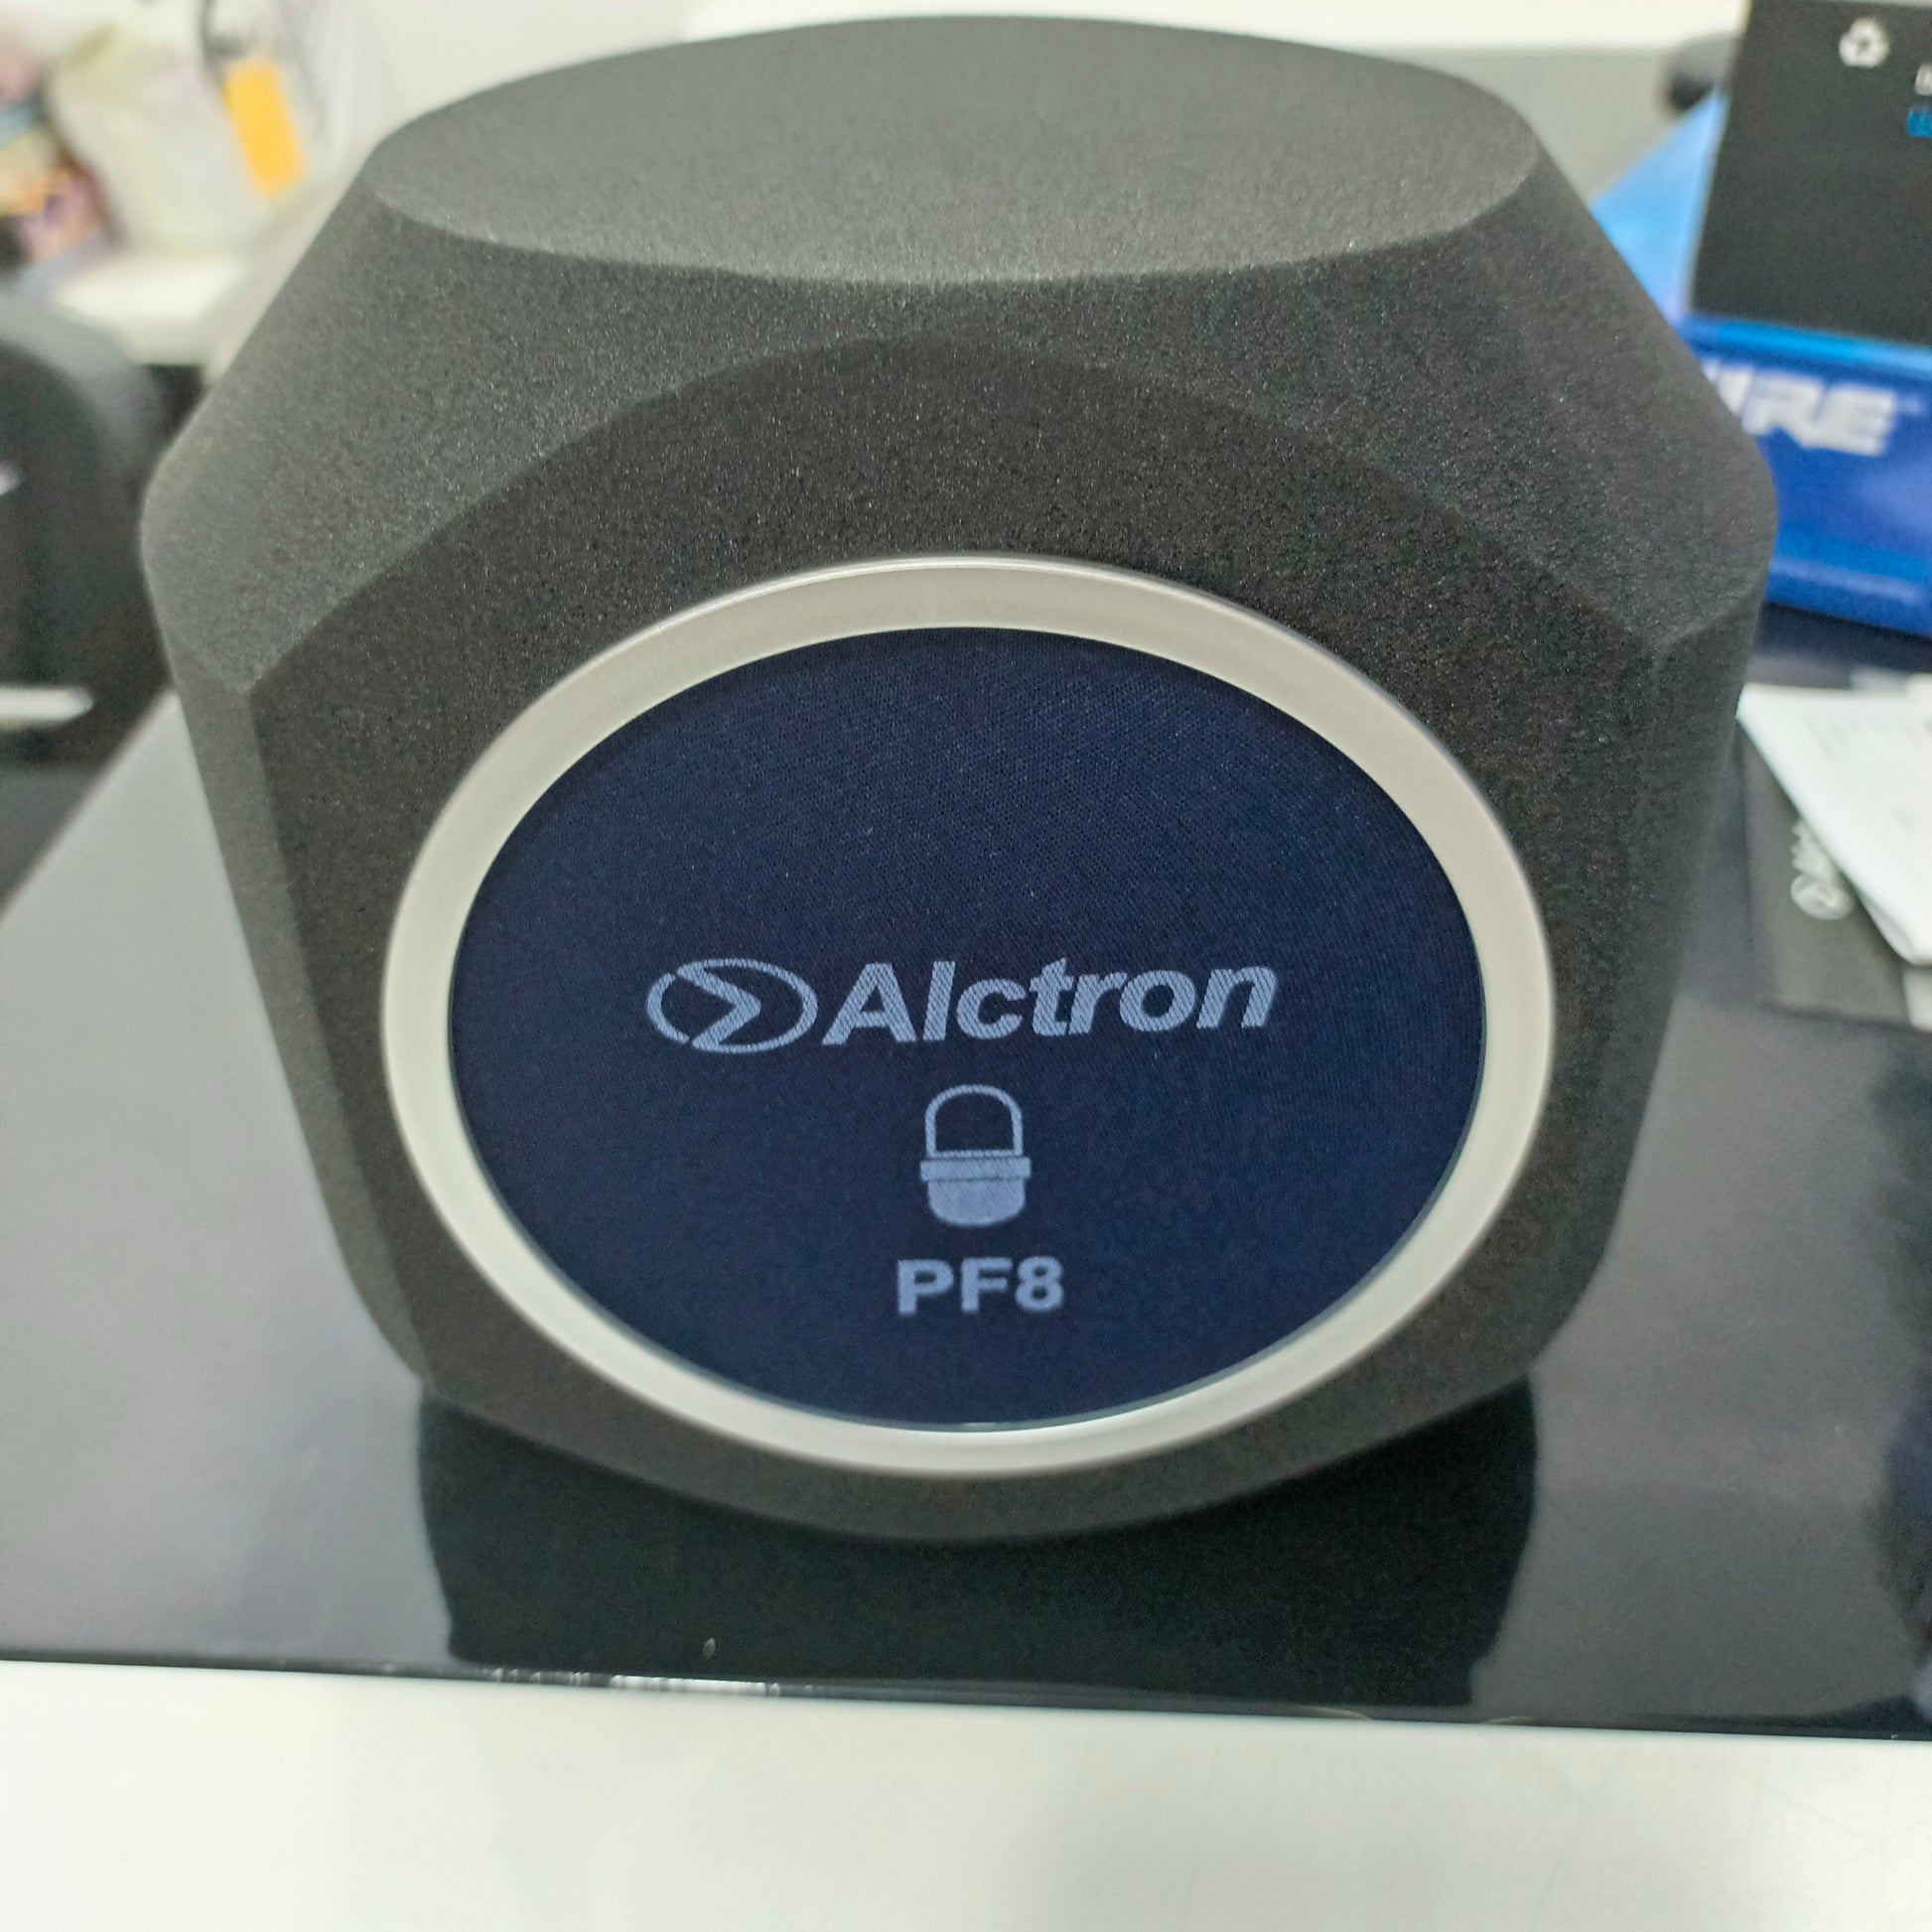 Alctron PF8 Professional Microphone Isolation Wind Shield with Pop Filter for Recording Studio - Brand New